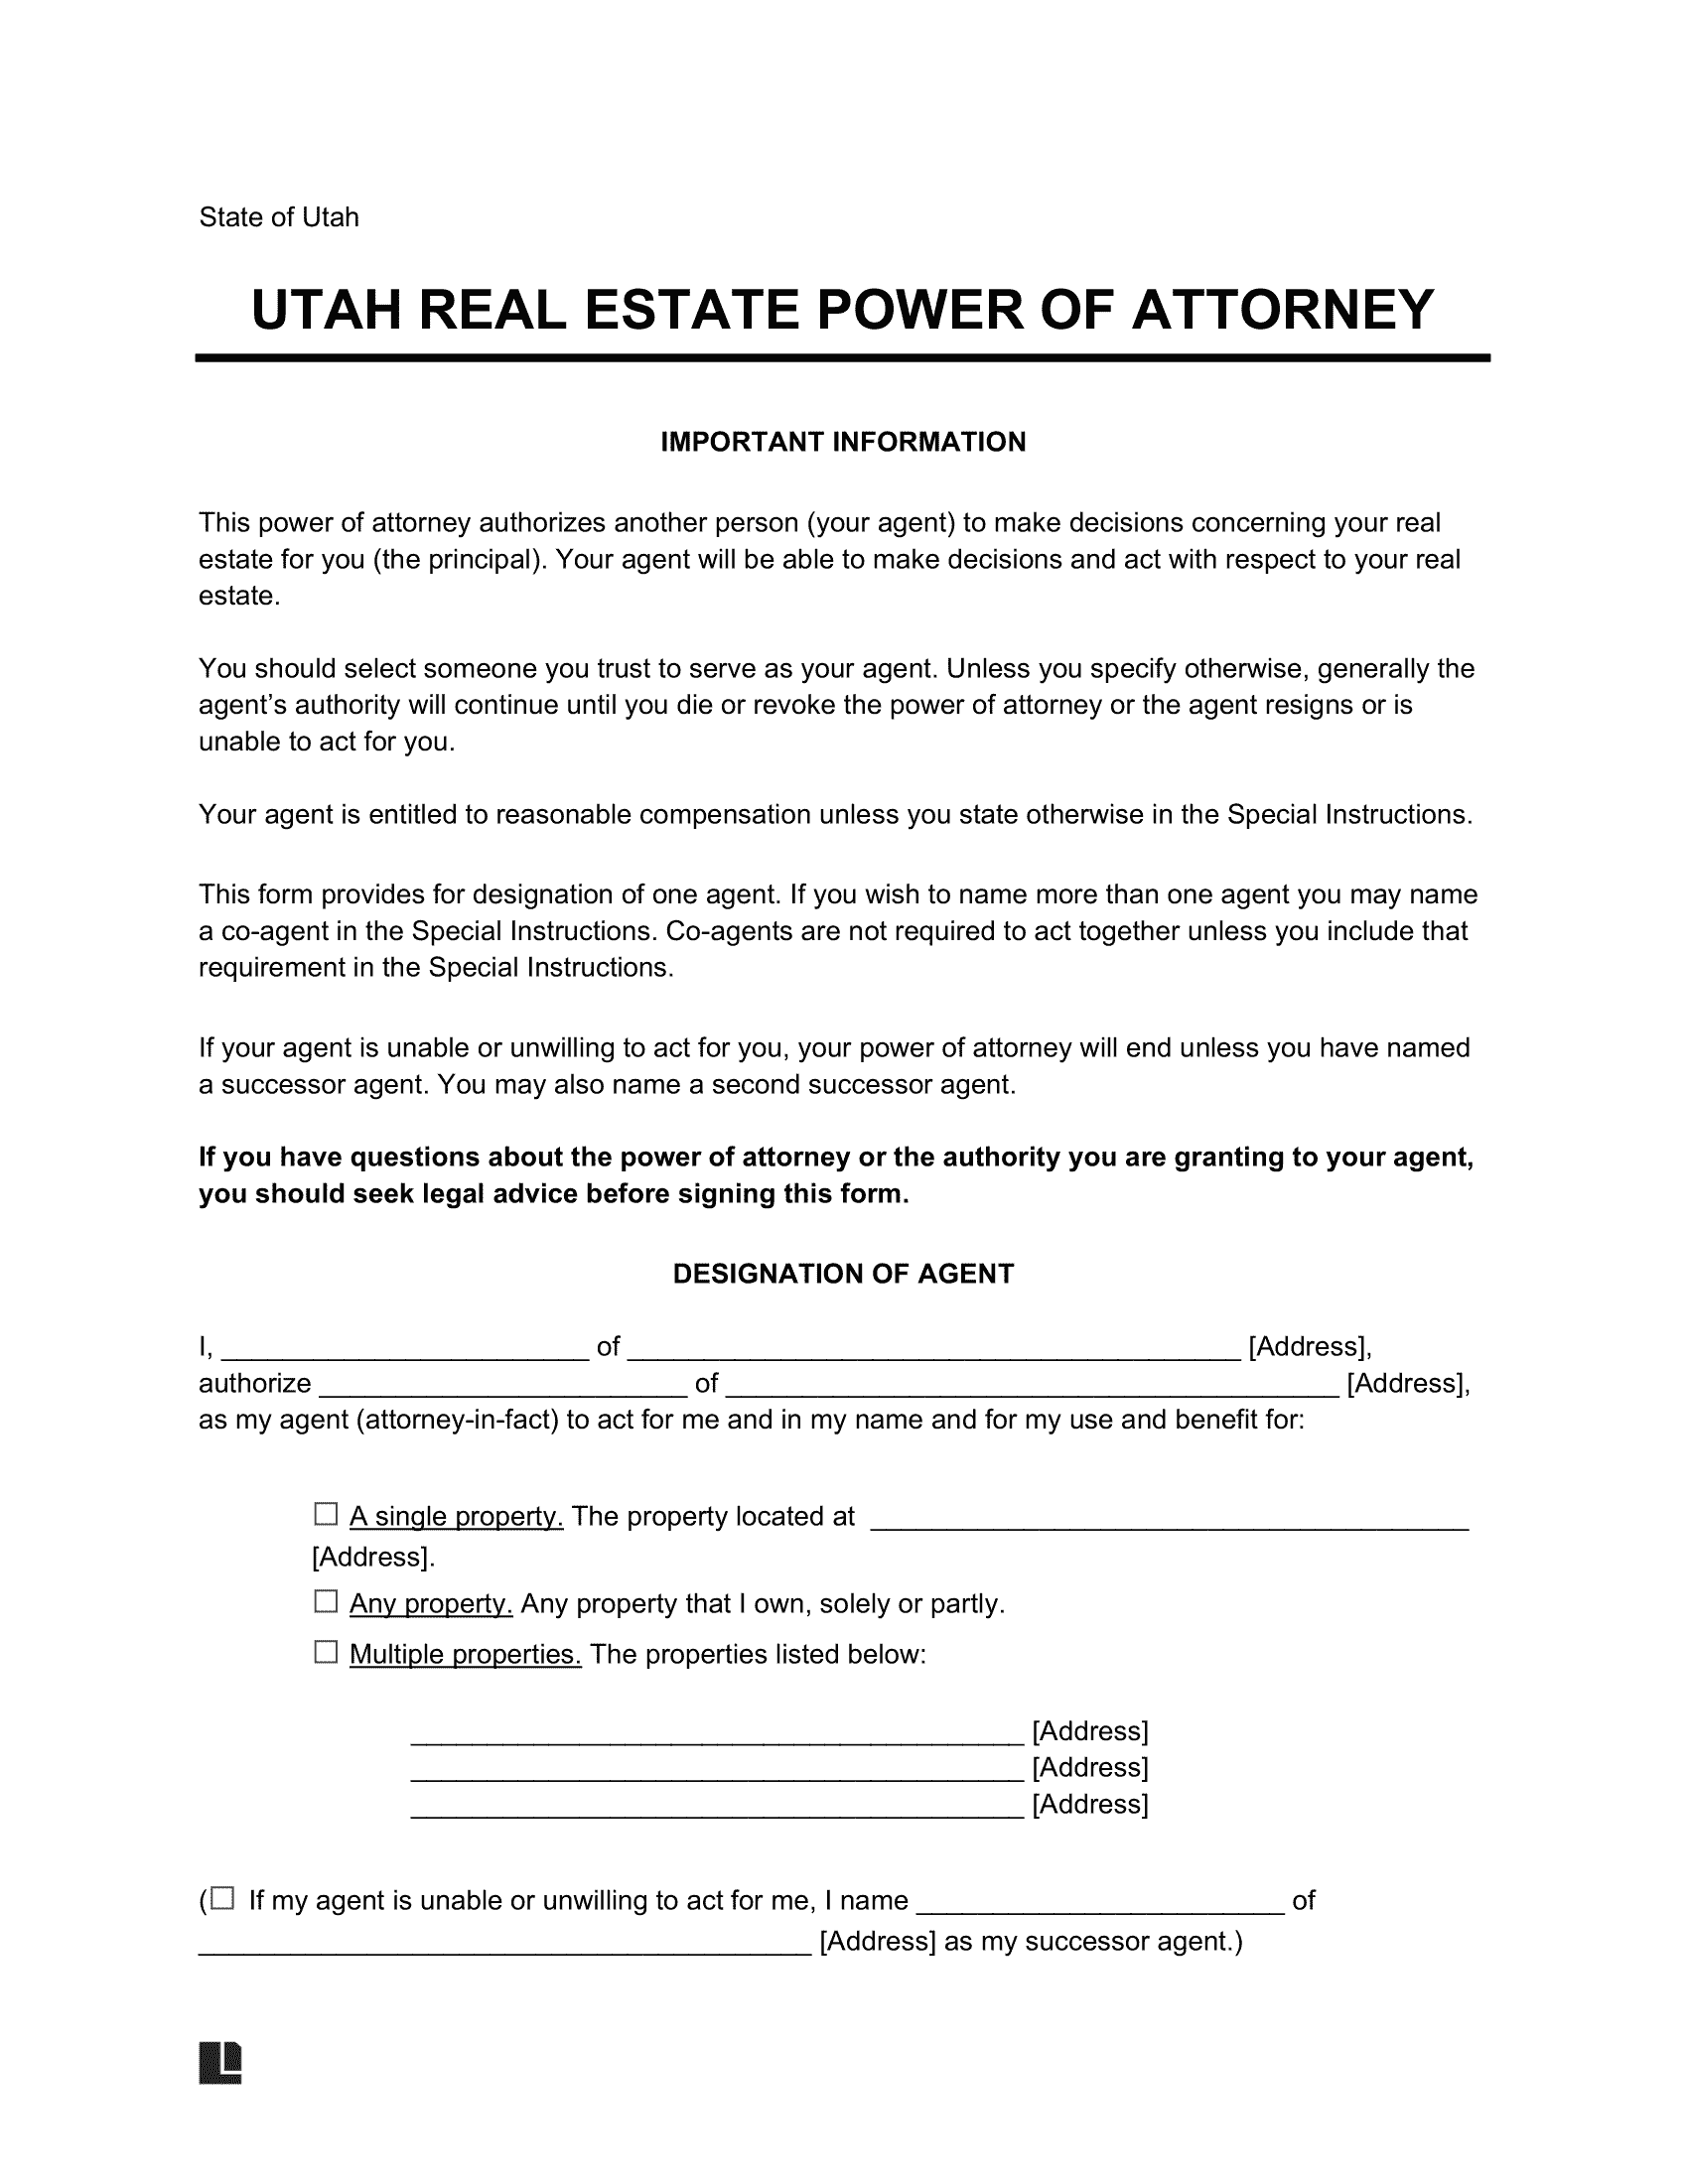 Utah Real Estate Power of Attorney Form